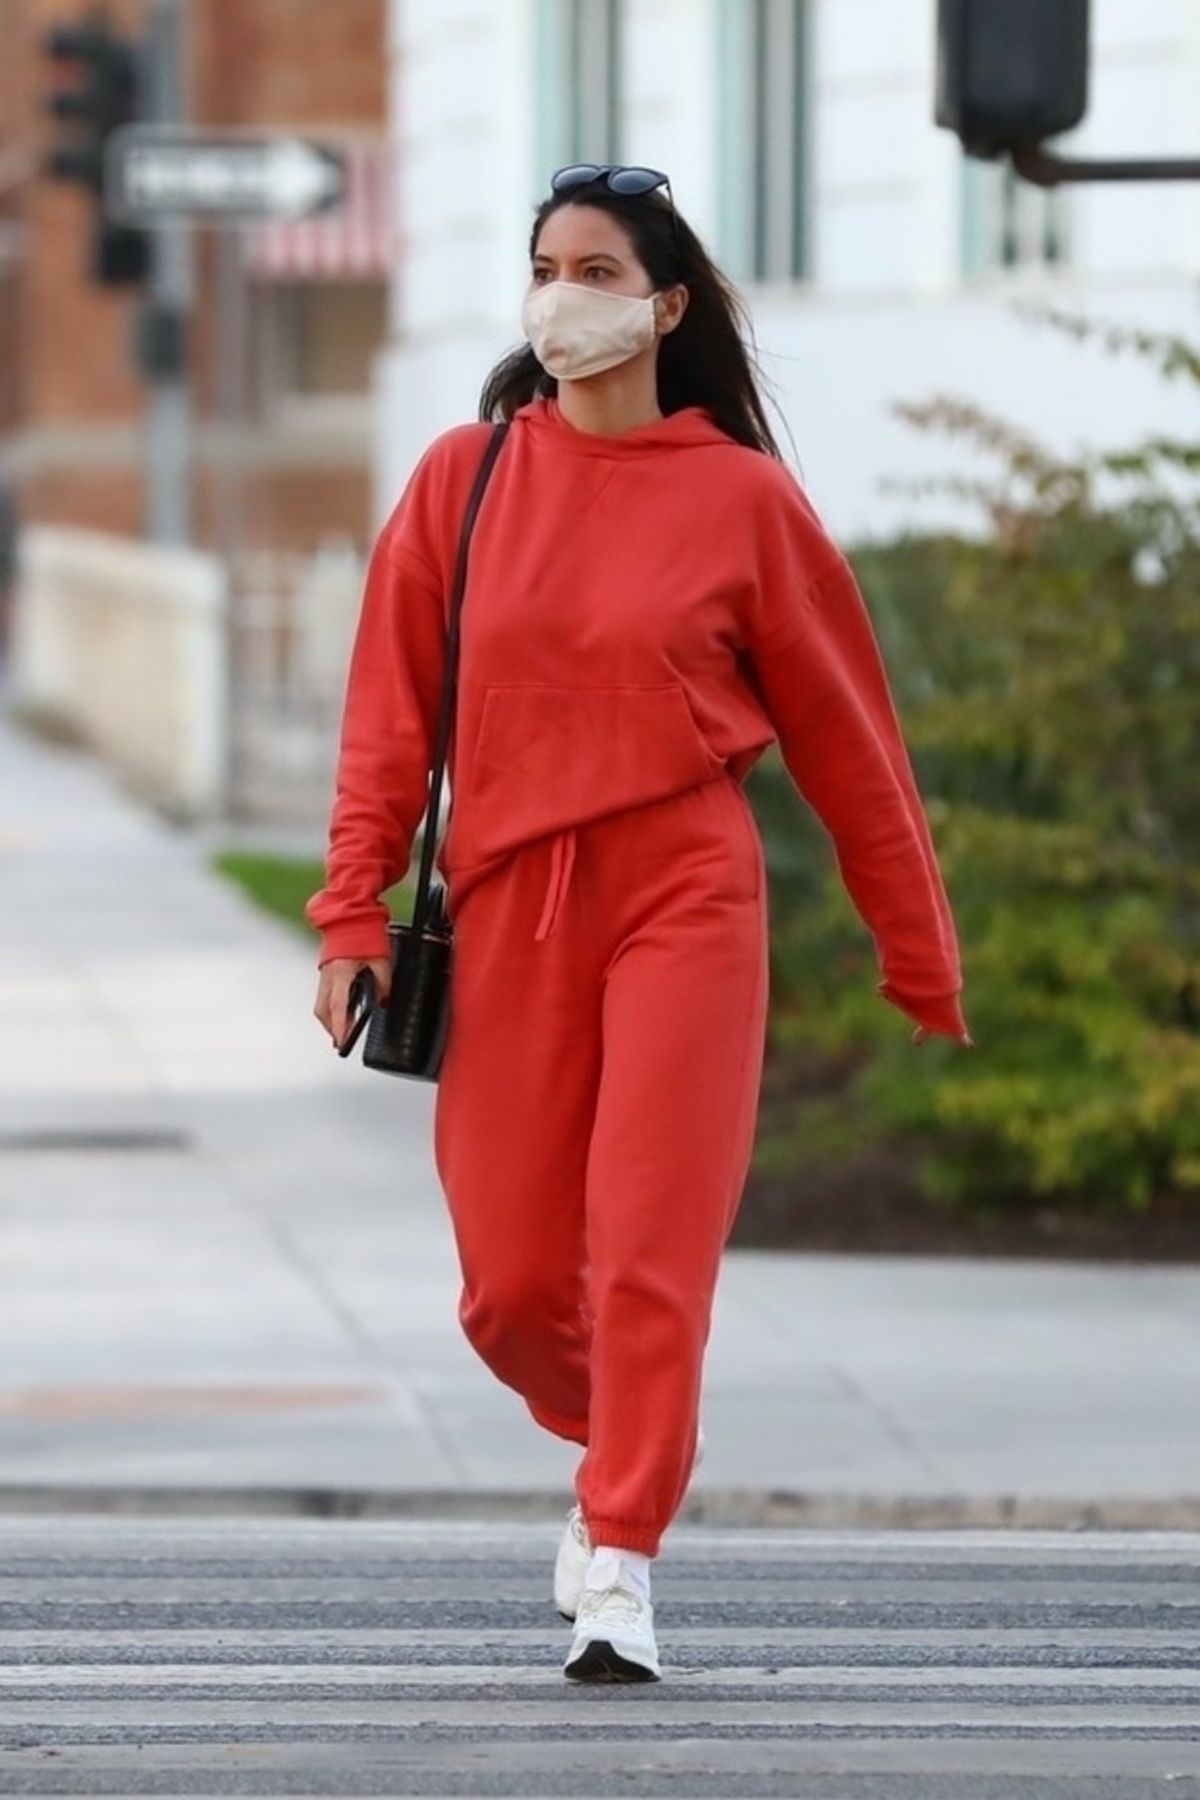 OLIVIA MUNN Out and About in Santa Monica 11/24/2020 – HawtCelebs